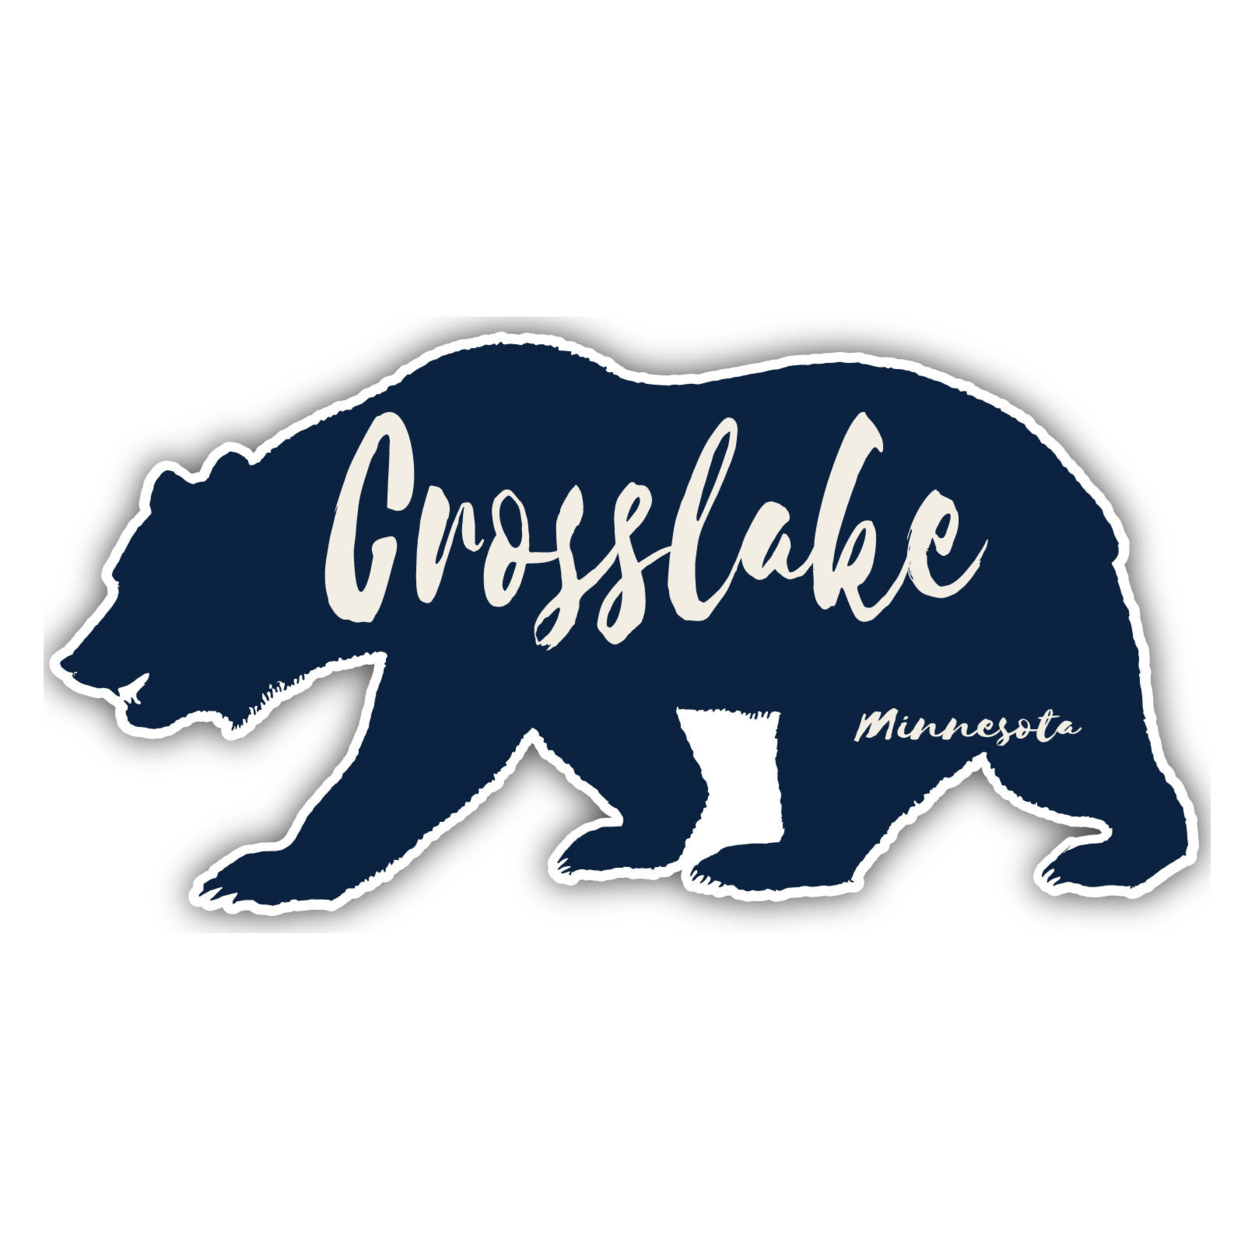 Crosslake Minnesota Souvenir Decorative Stickers (Choose Theme And Size) - 4-Pack, 2-Inch, Great Outdoors